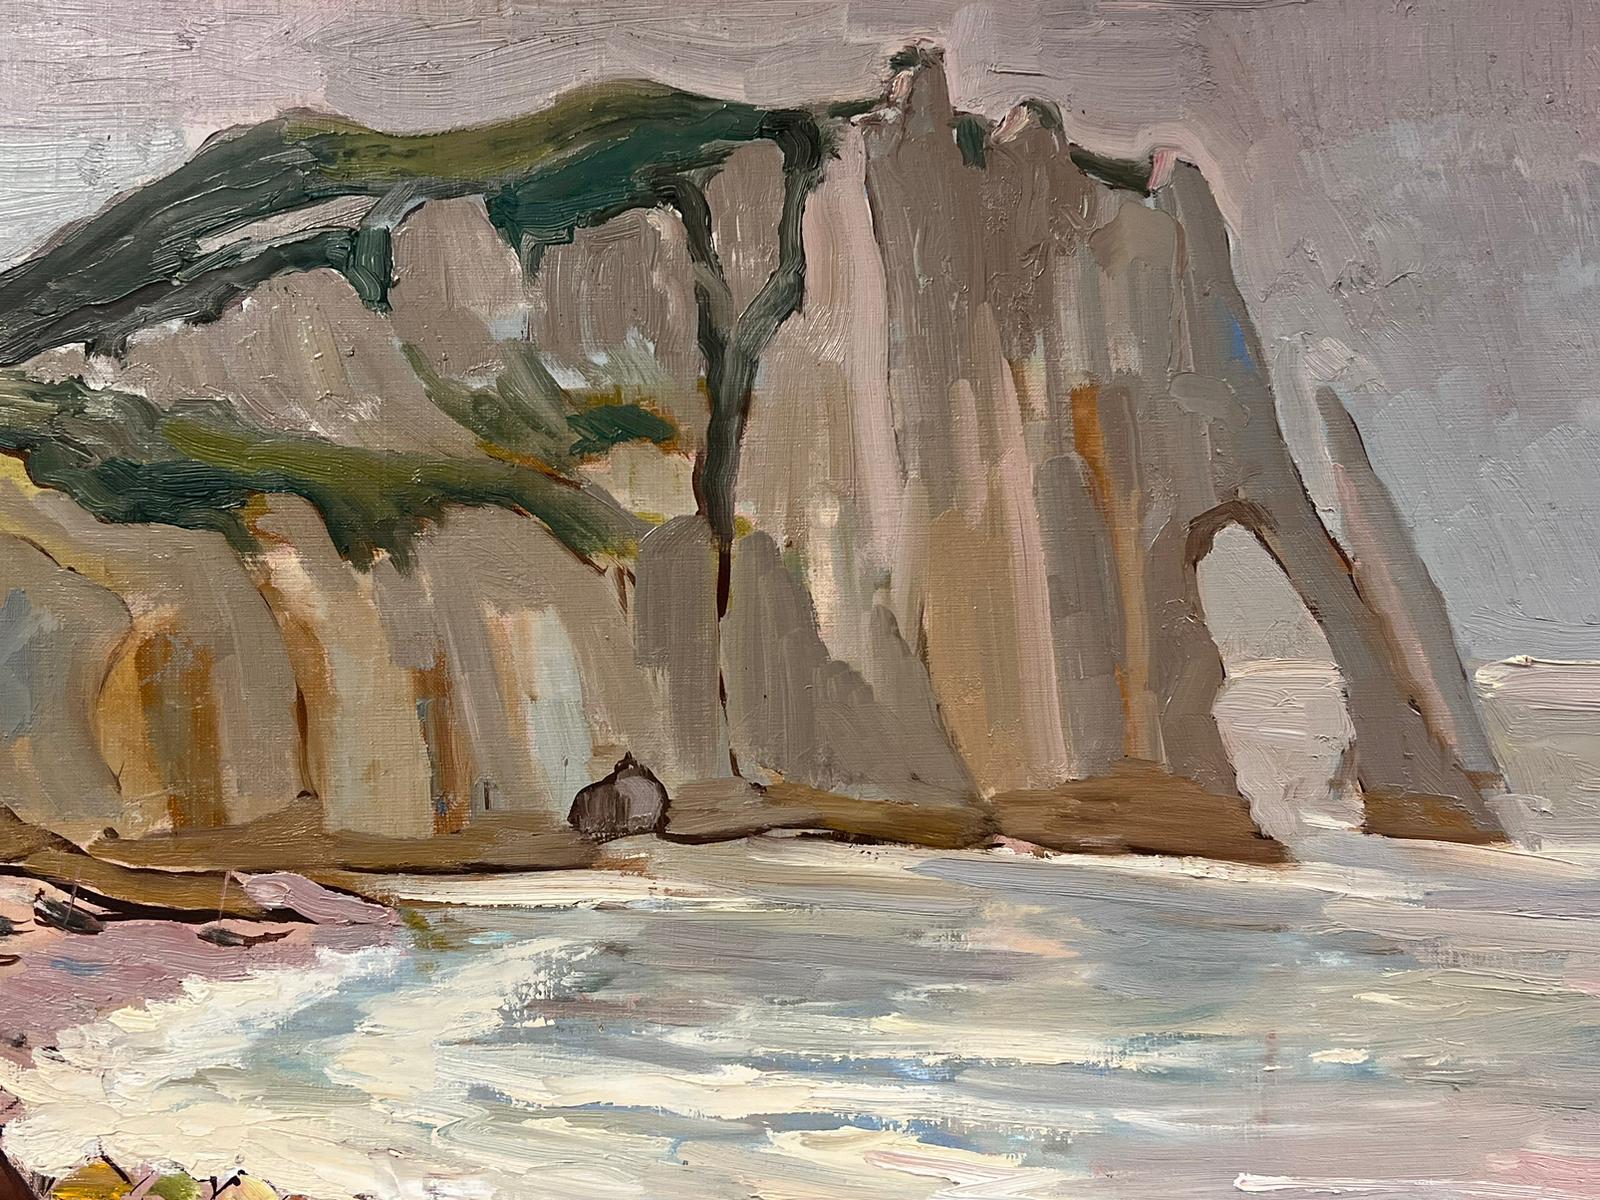 Etretat
signed by Georges Bordonave (French contemporary) 
dated 1970
oil painting on canvas, unframed
unframed: 20 x 24 inches
condition: very good
provenance: from a large private collection of this artists work, western Paris, France. 